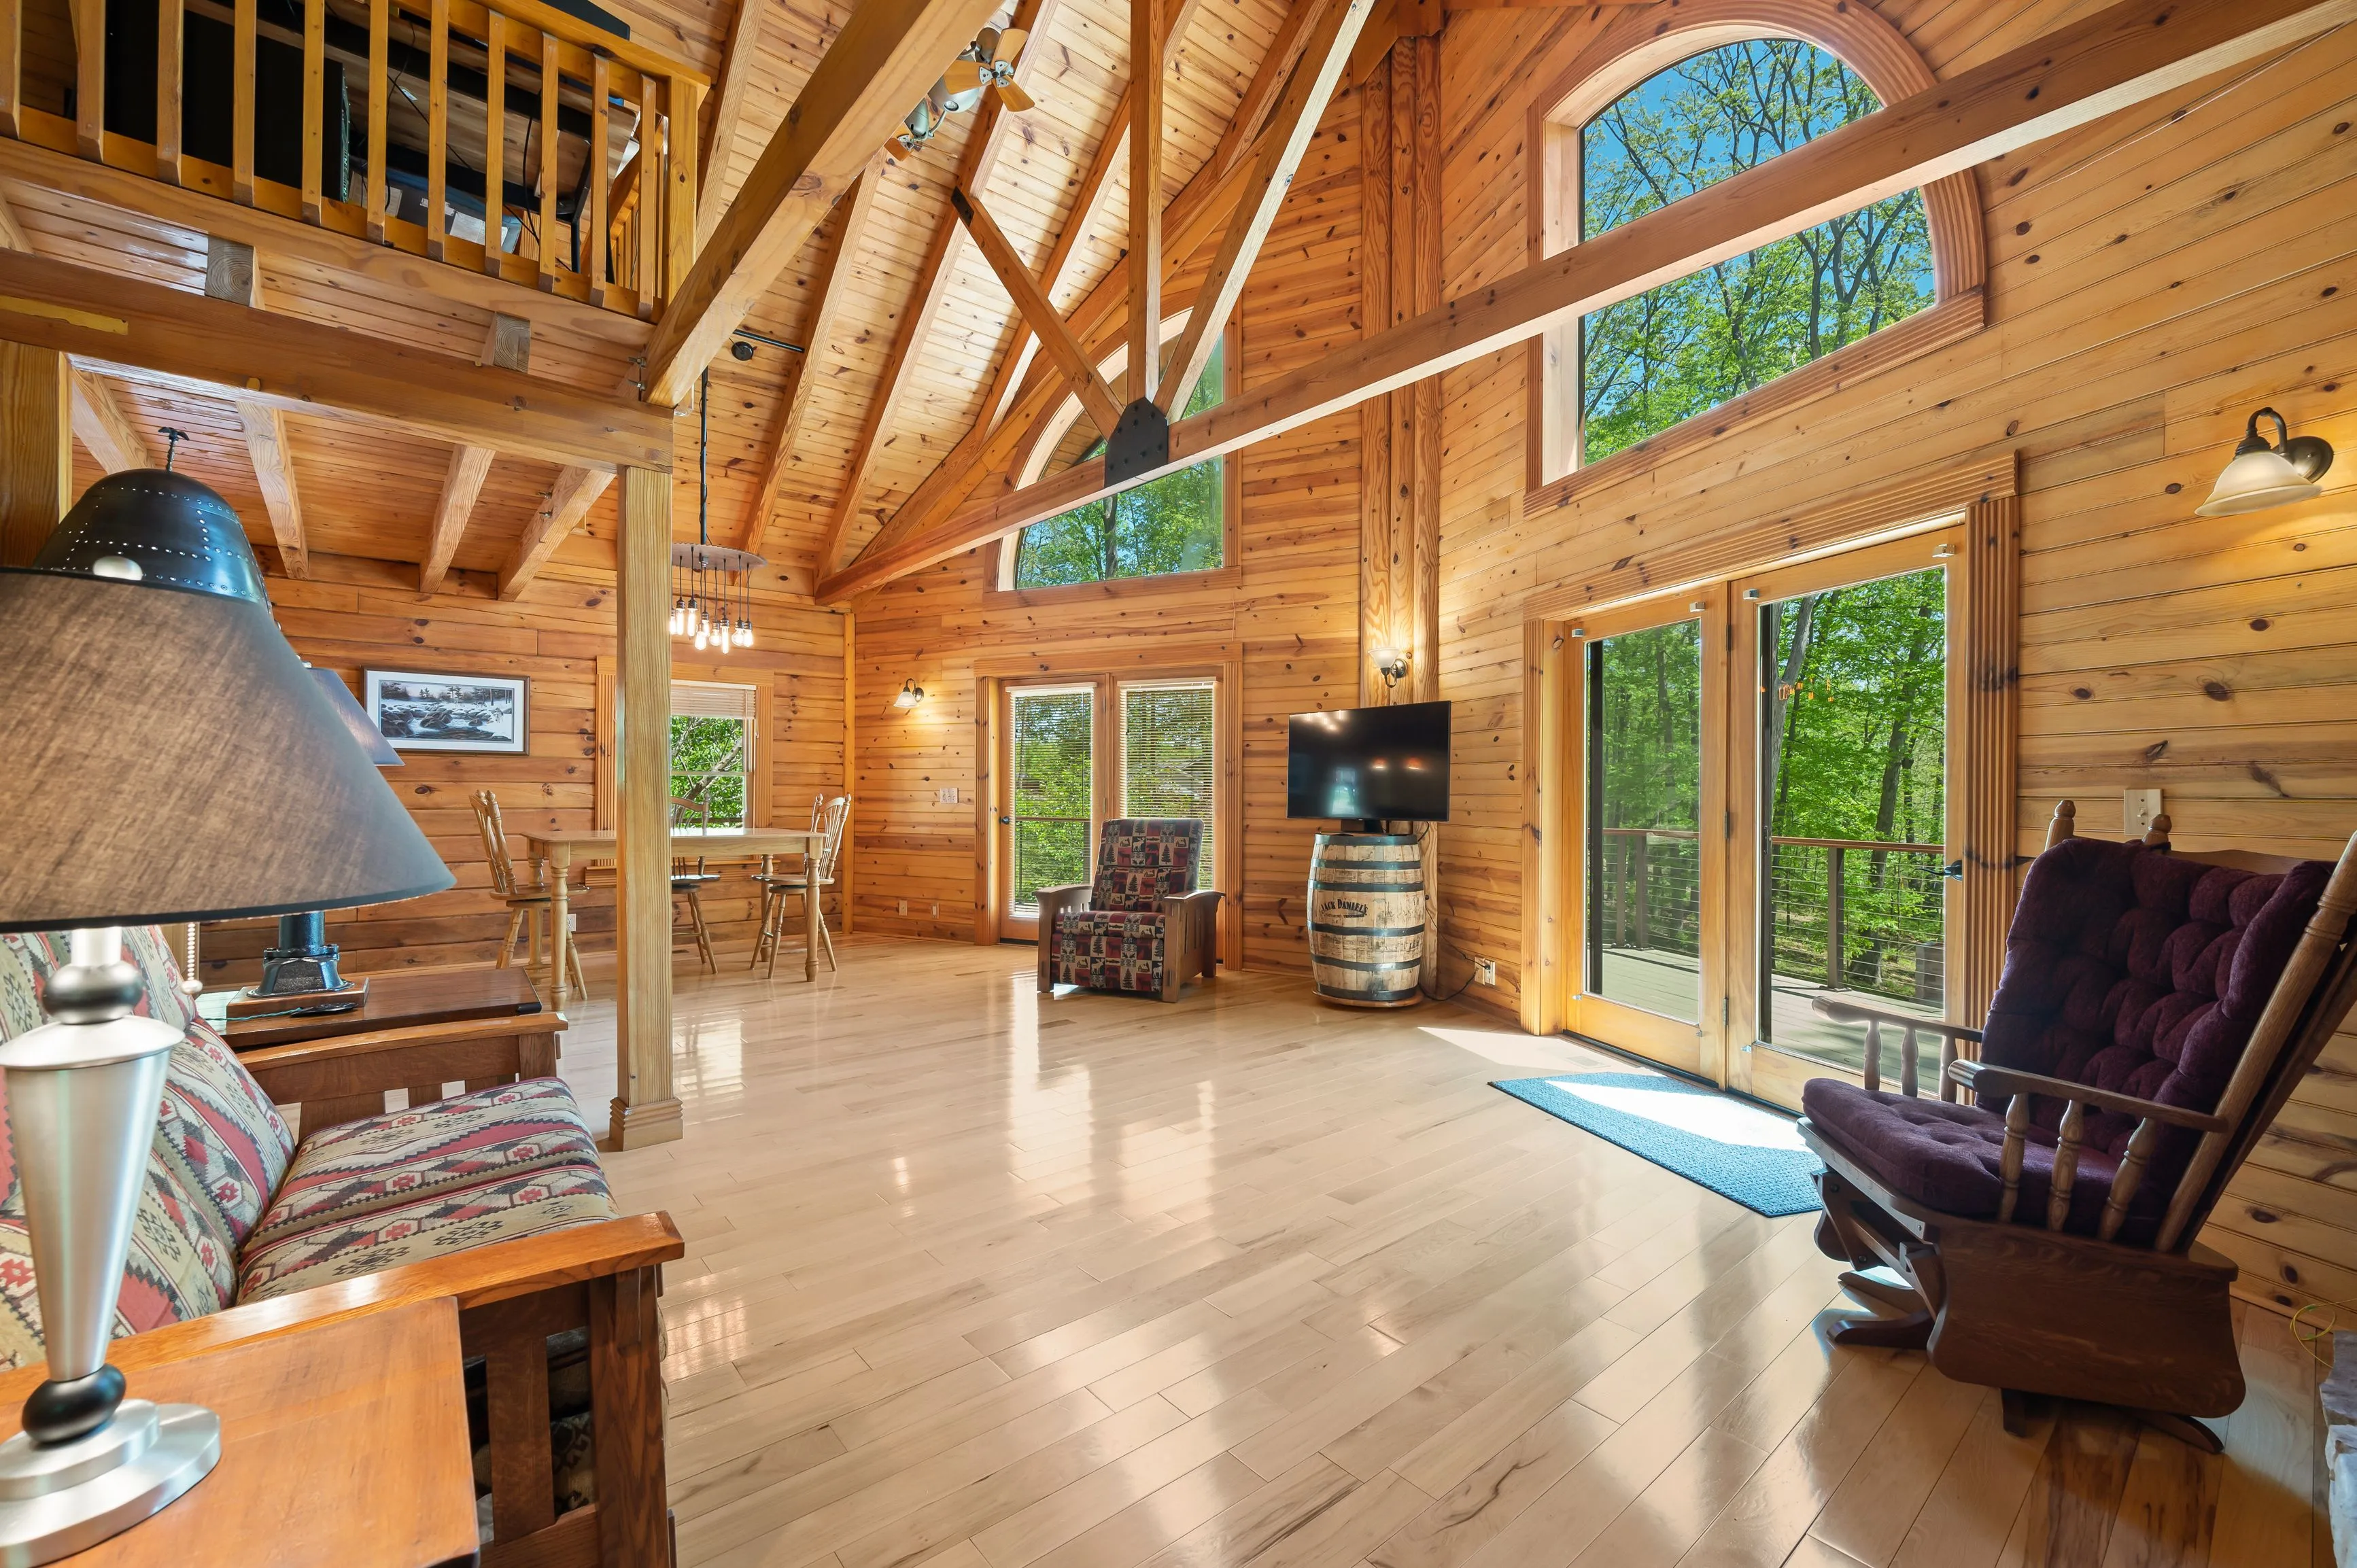 Cozy wooden cabin interior with high ceilings, large windows, and rustic furniture, featuring a loft area and polished wood floors.